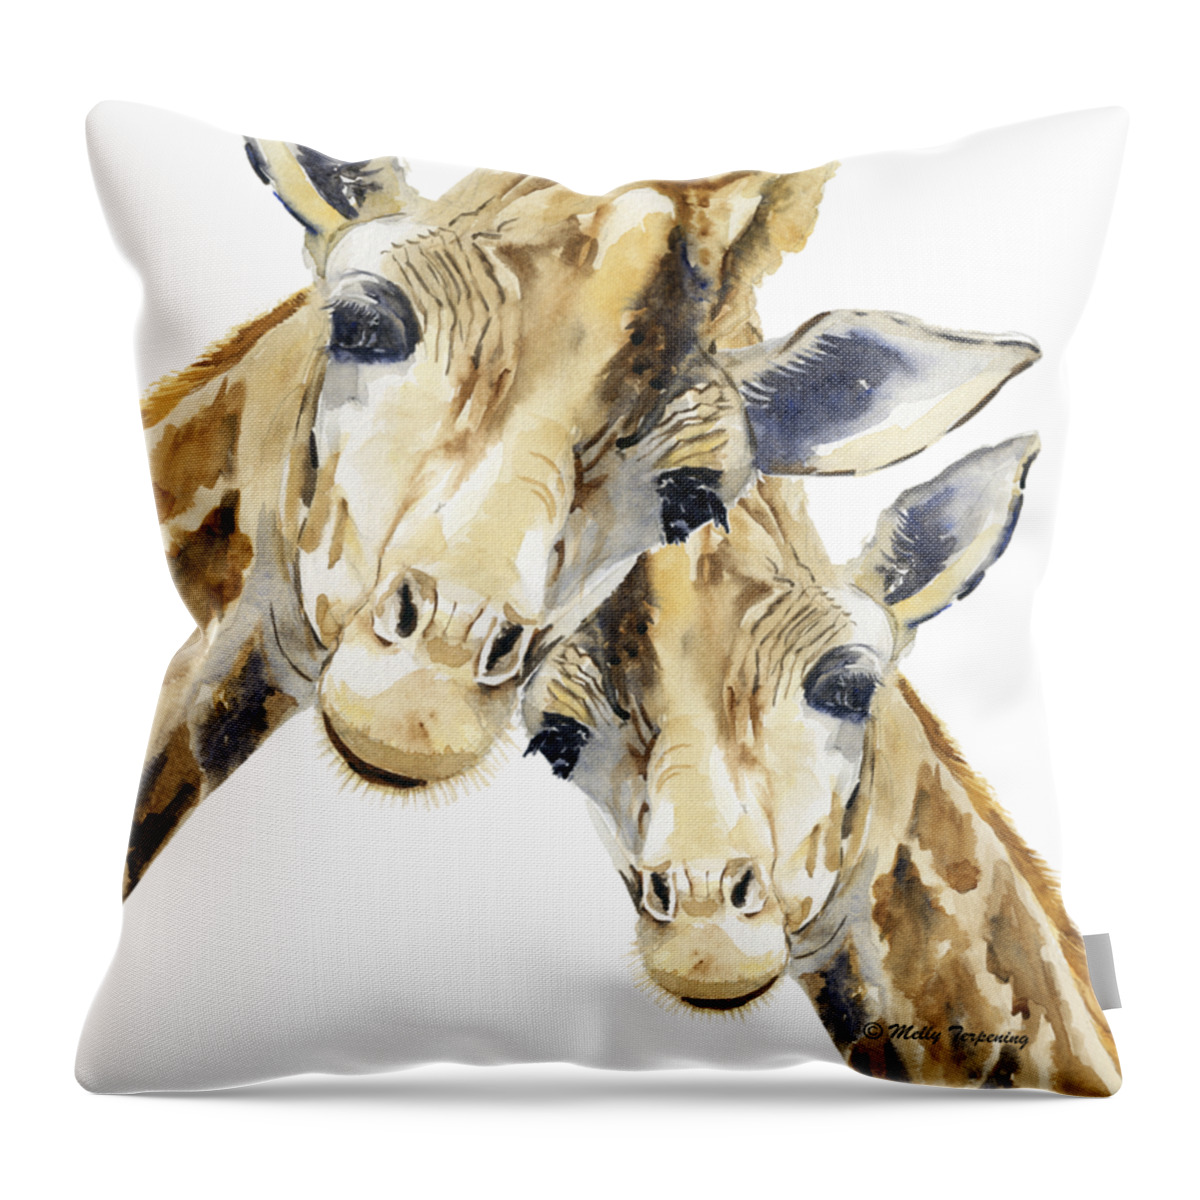 What Are You Doing Throw Pillow featuring the painting What are you doing? by Melly Terpening